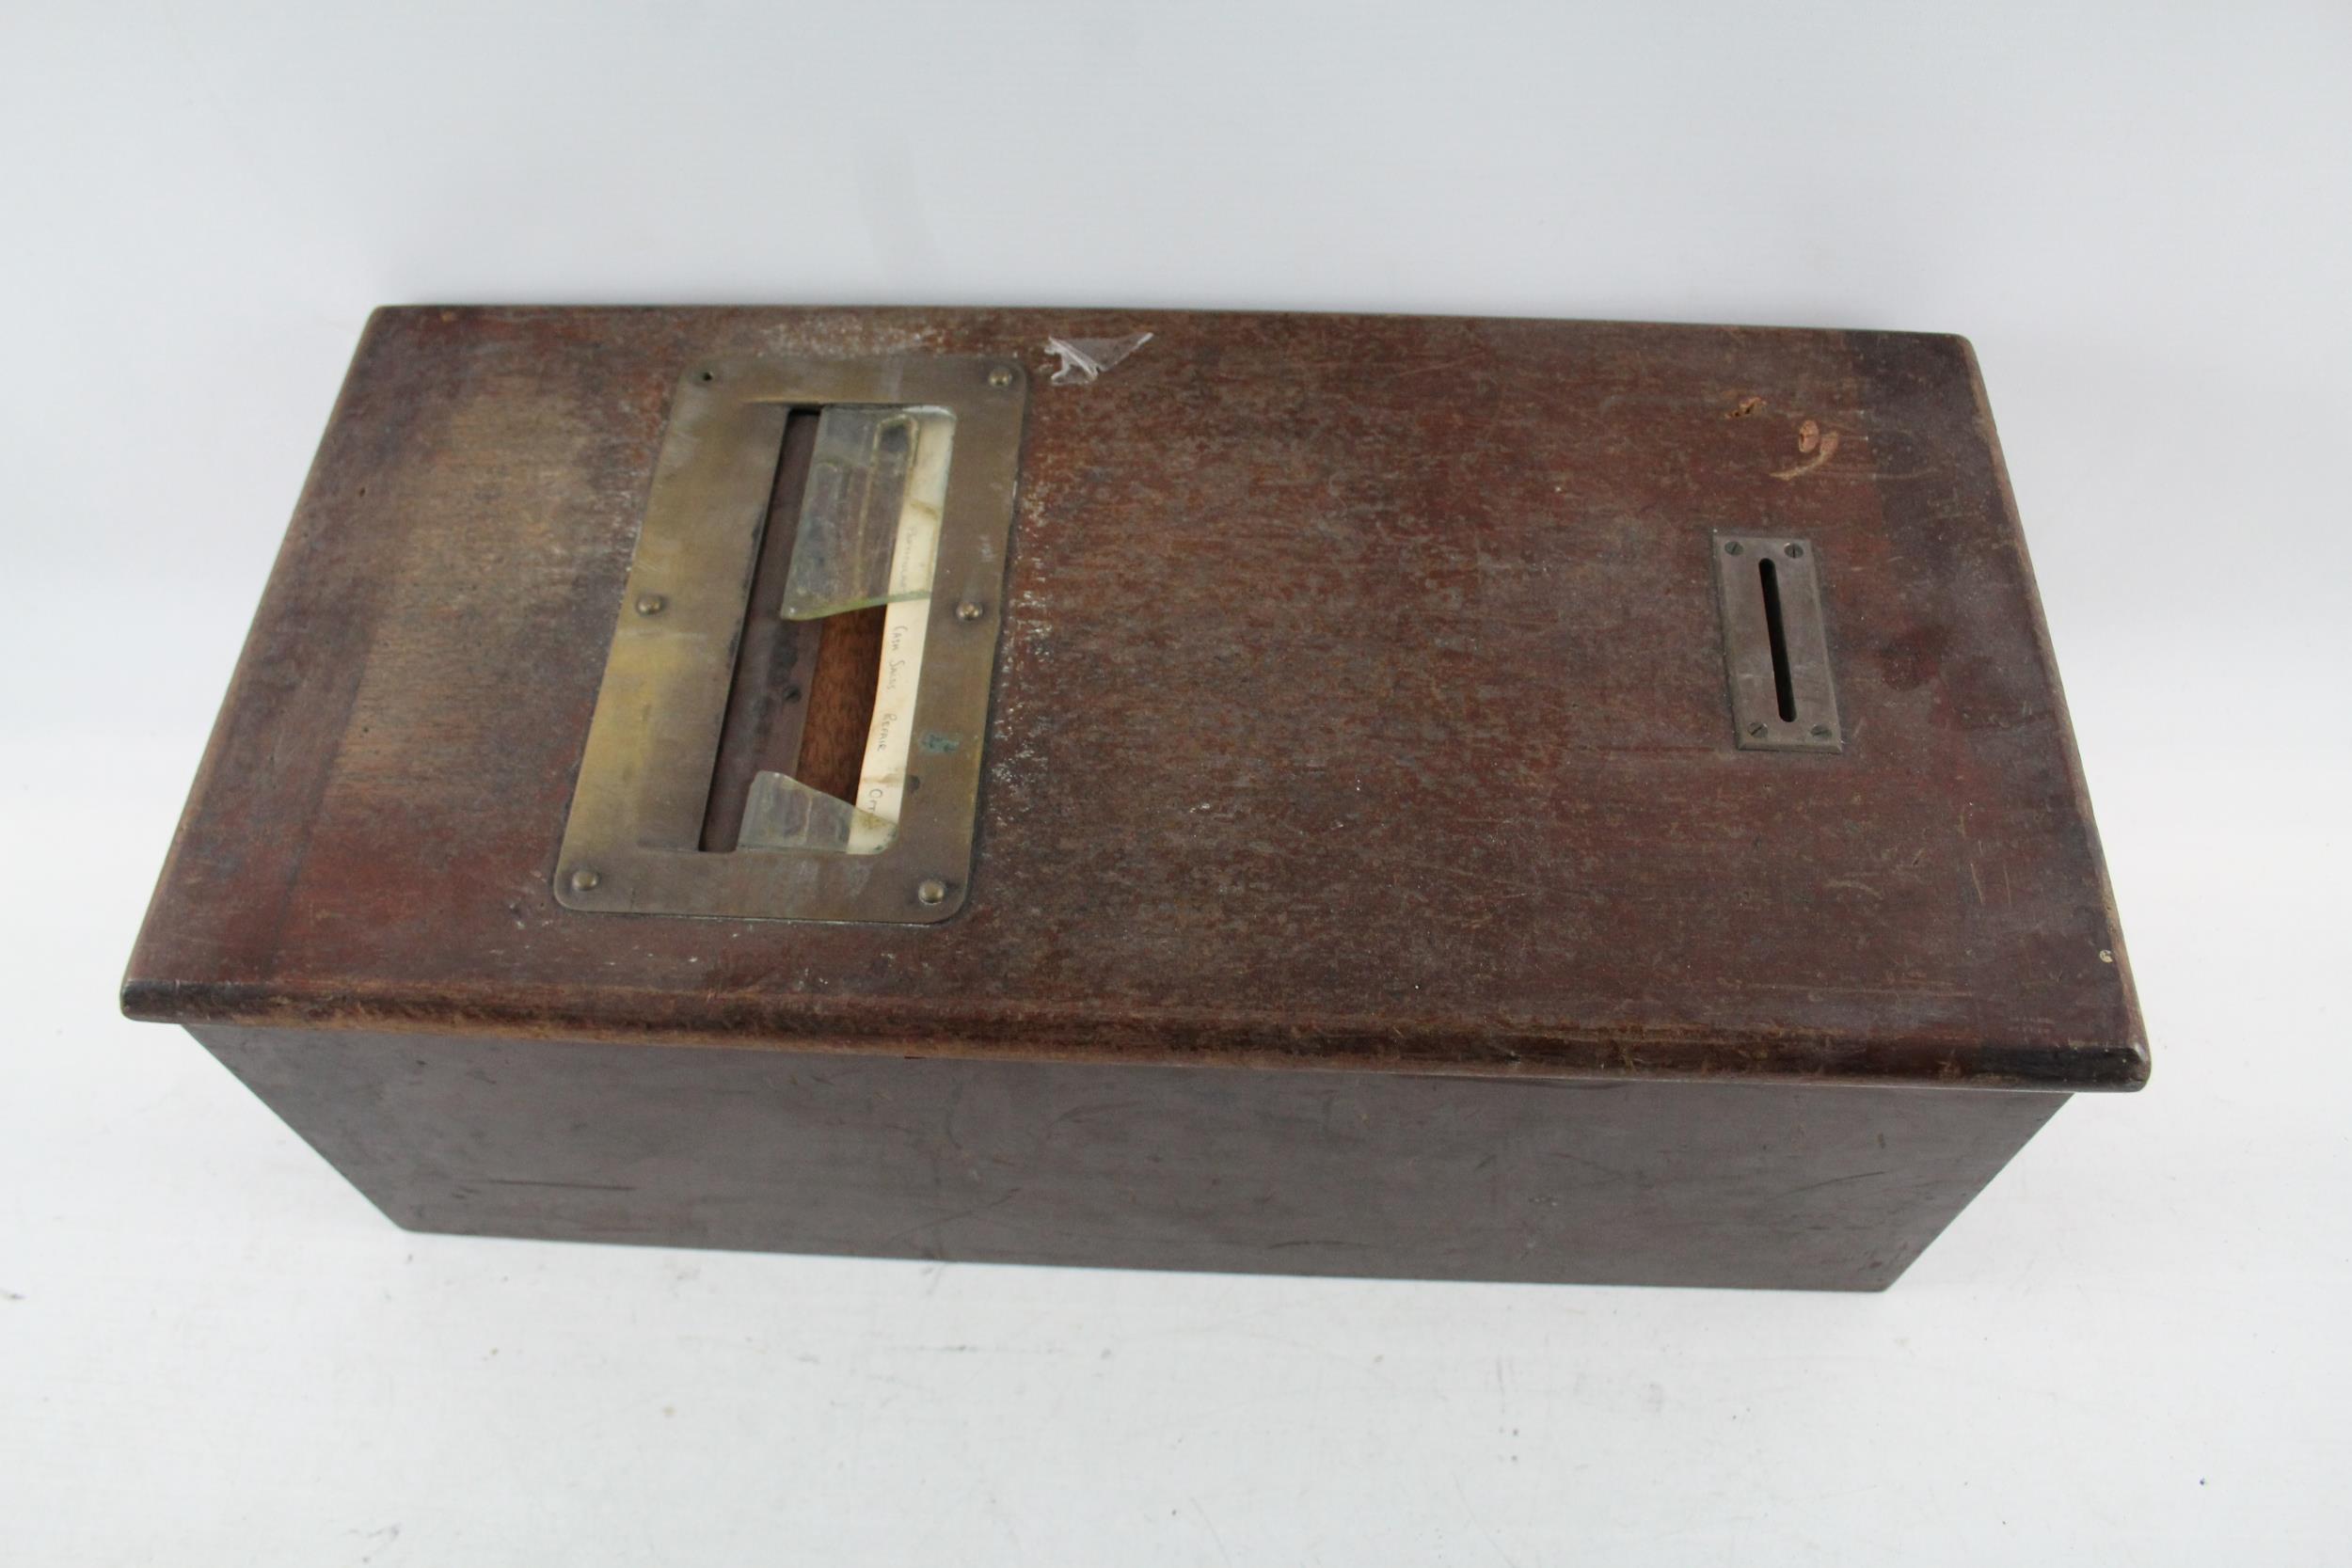 Antique Mahogany Cash Till Box By Gledhill & Sons Ltd. W/ Brass Elements - Approx Dimensions: - Image 6 of 7